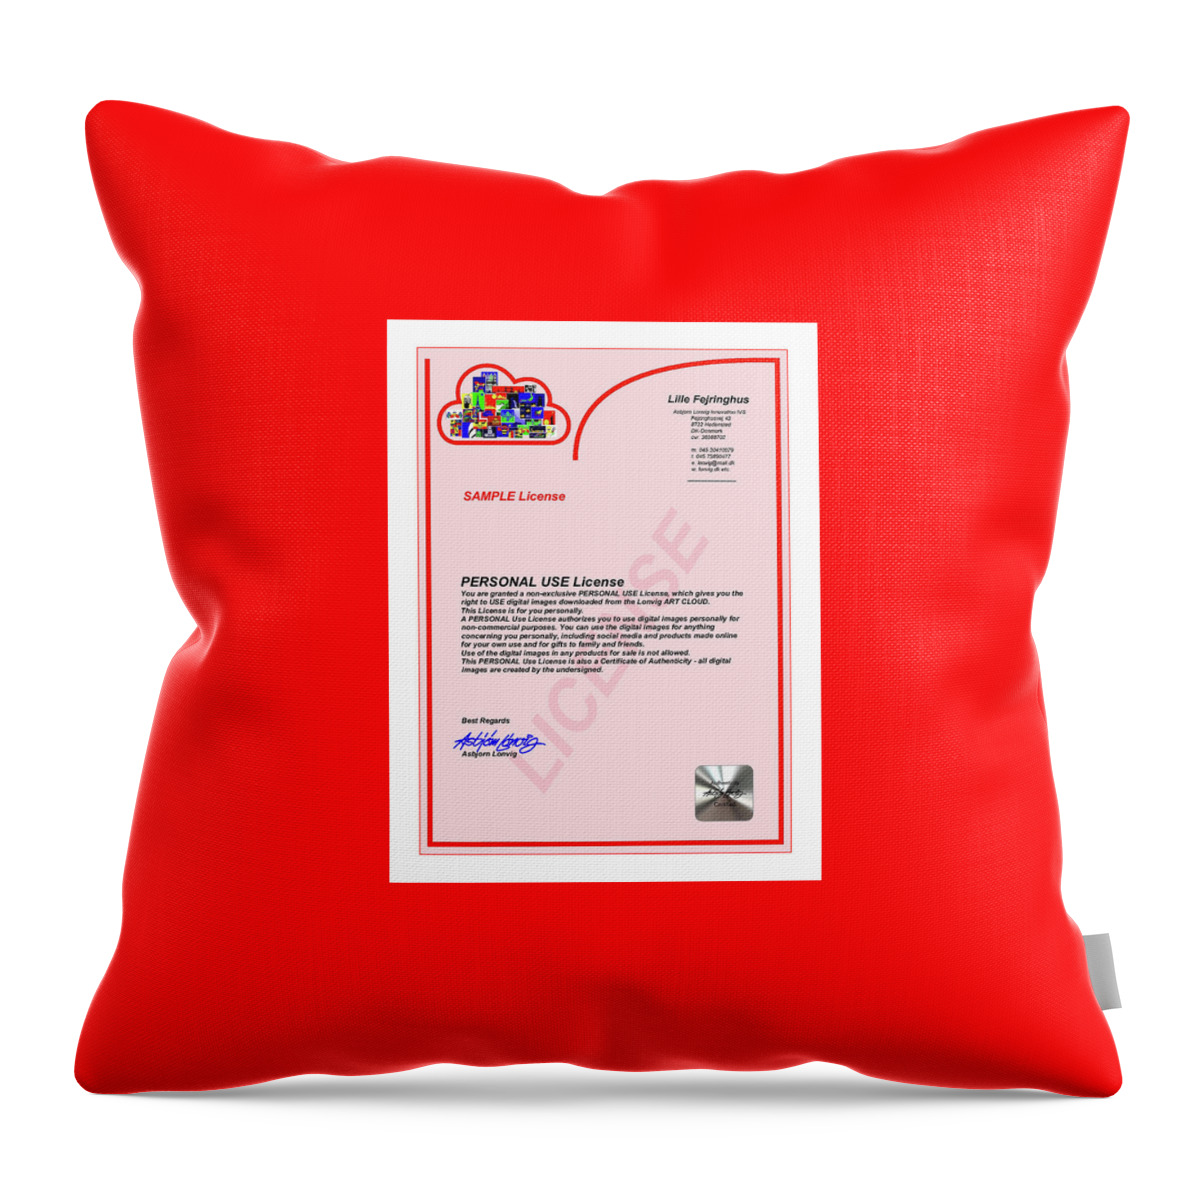  Throw Pillow featuring the mixed media 1000 images for download for PERSONAL Use #2 by Asbjorn Lonvig